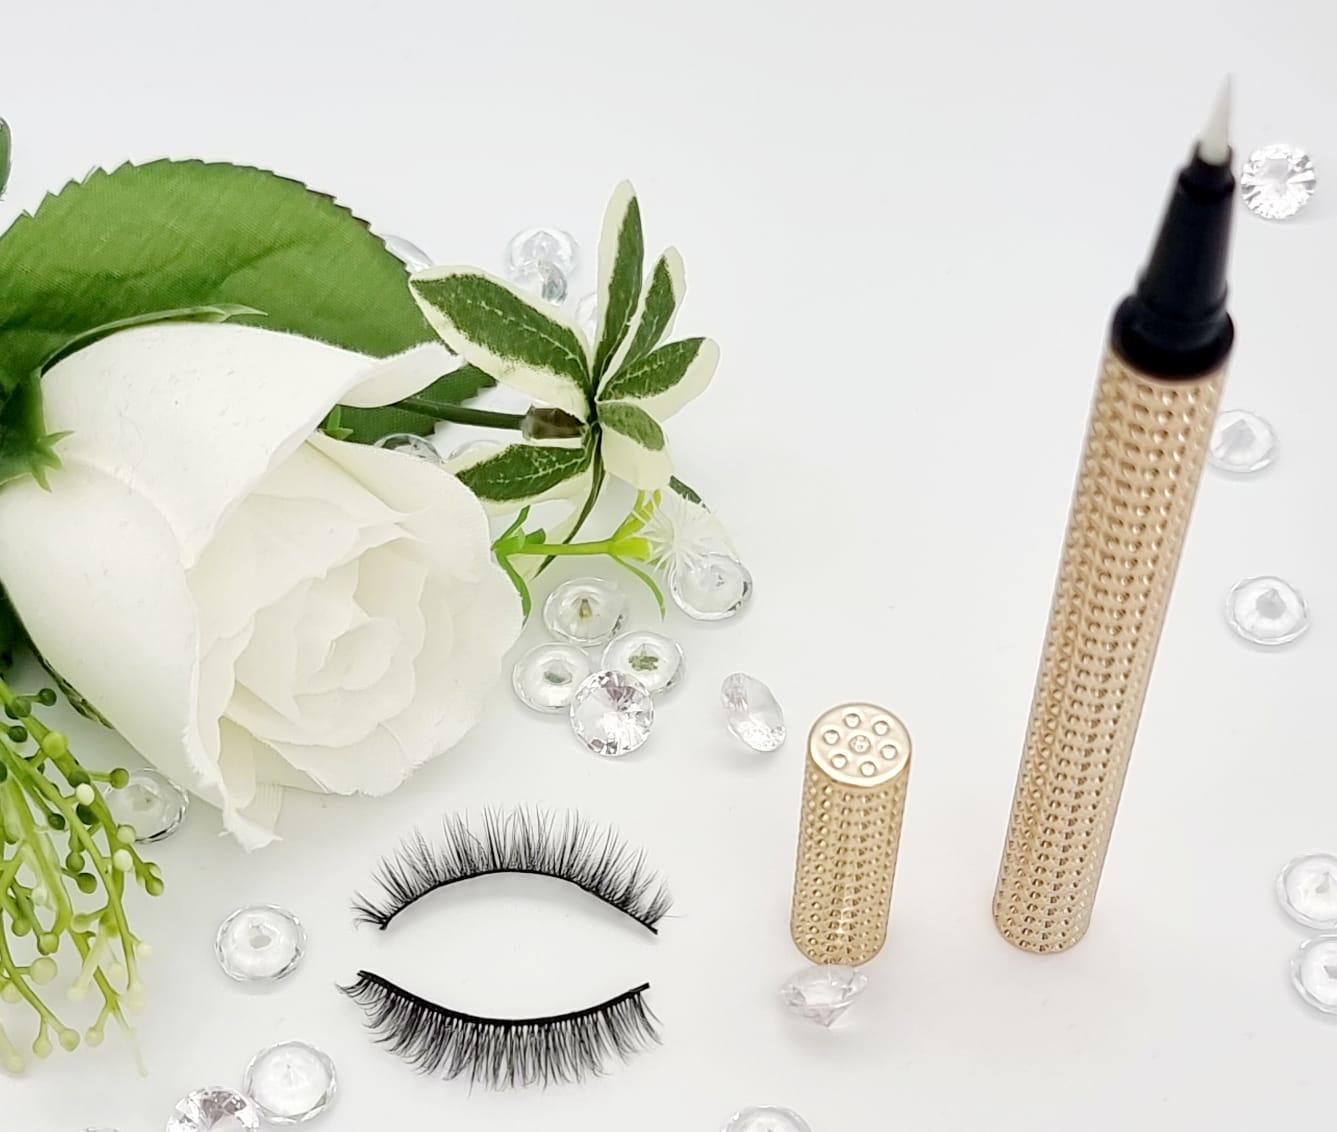 Kat Our 3D Natural silk lashes   Perfect for seamlessly blending in with your own lashes   Perfect for everyday use, weddings and mature eyes